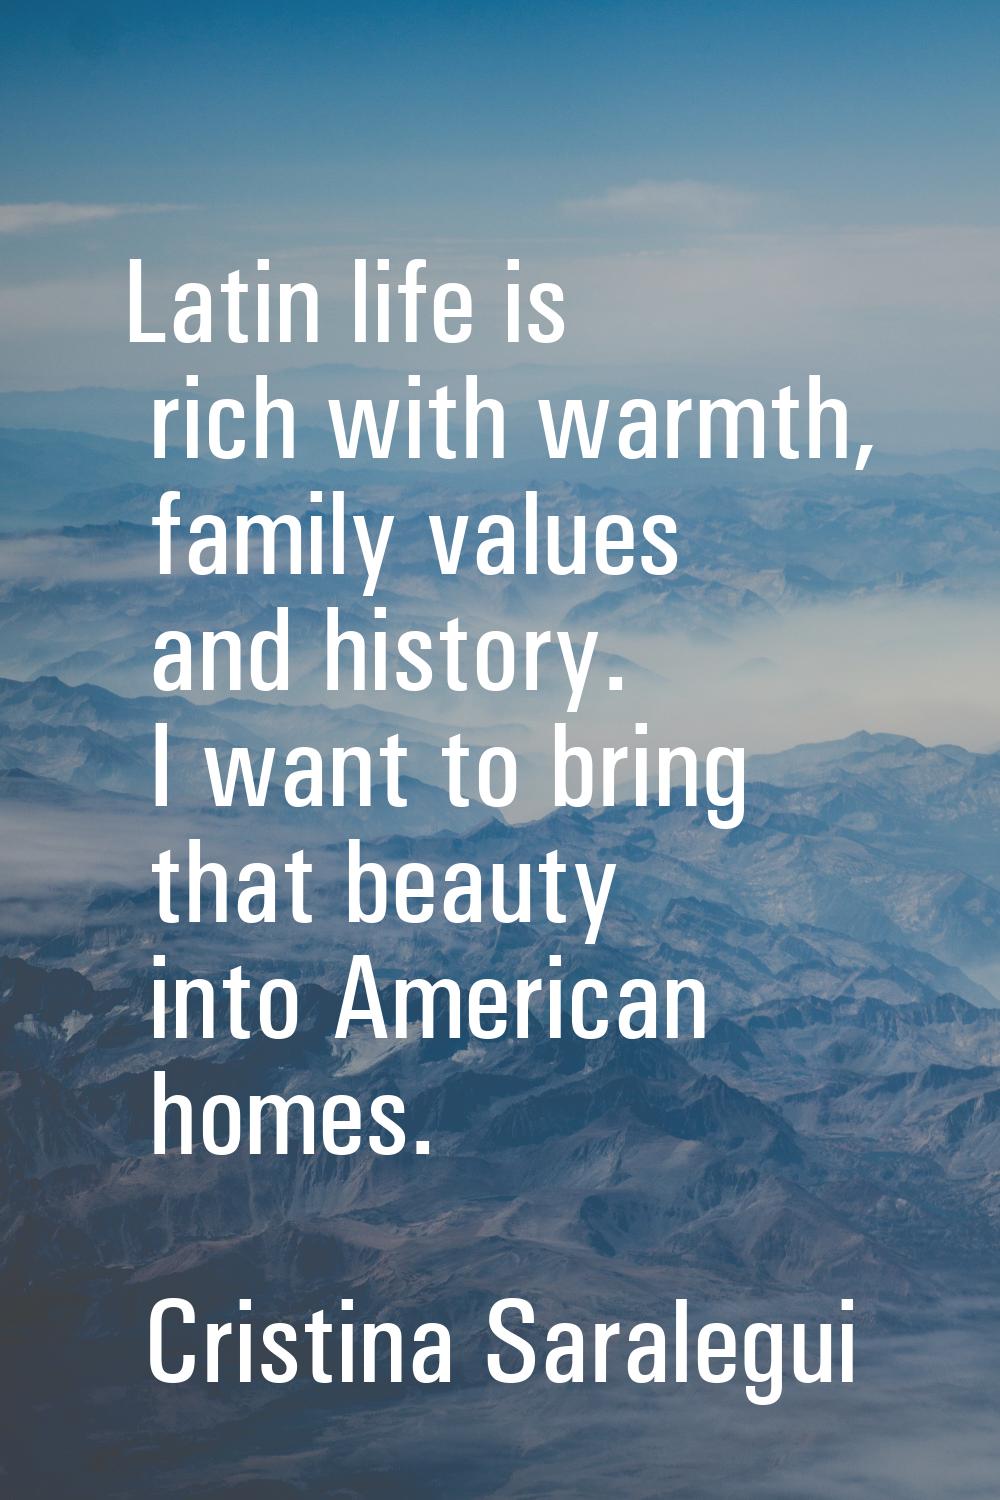 Latin life is rich with warmth, family values and history. I want to bring that beauty into America